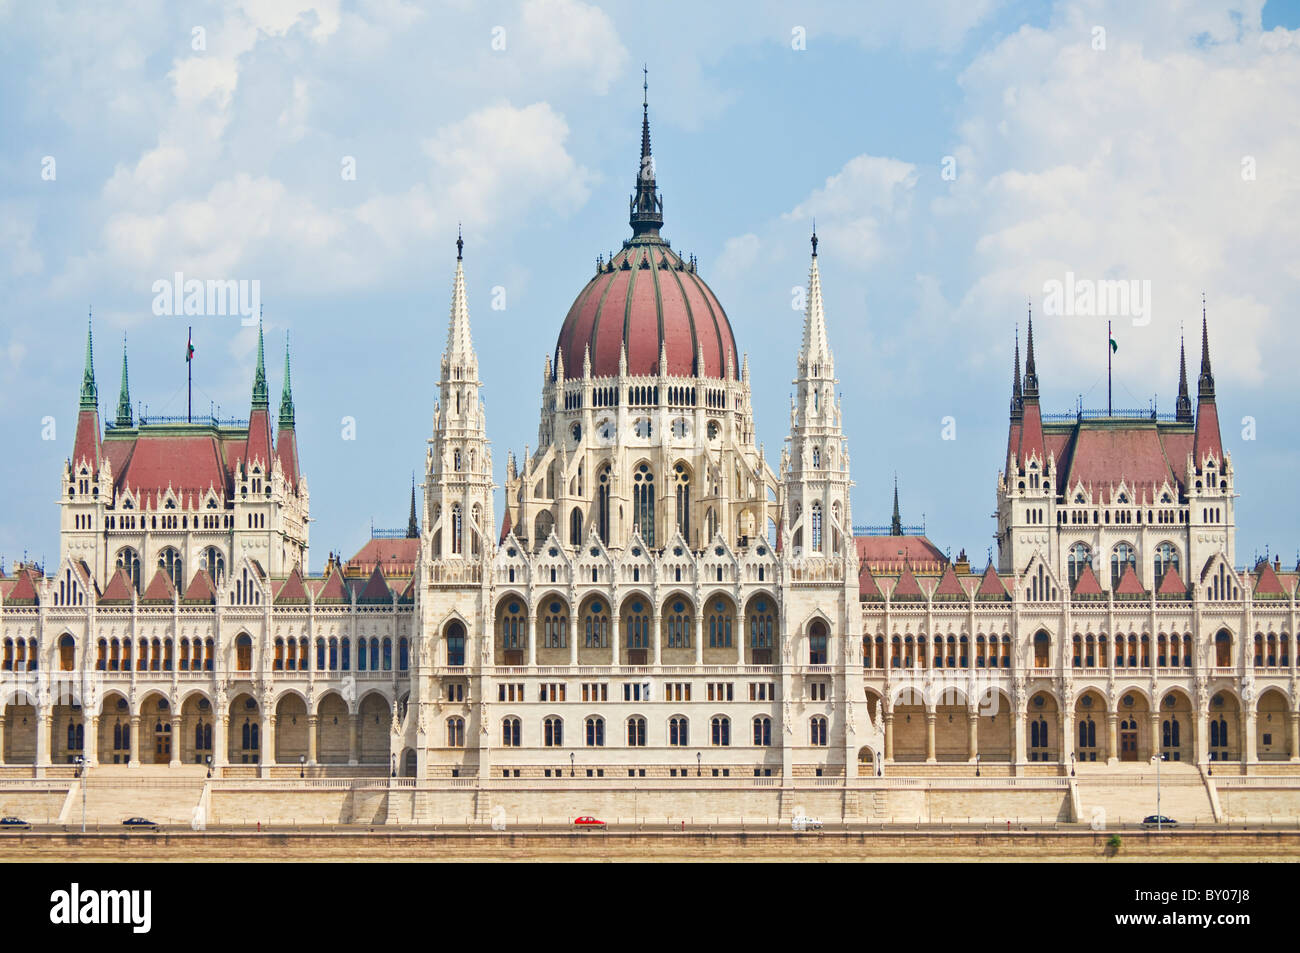 The neo-gothic Hungarian Parliament building, designed by Imre Steindl, Budapest, Hungary, Europe, EU Stock Photo